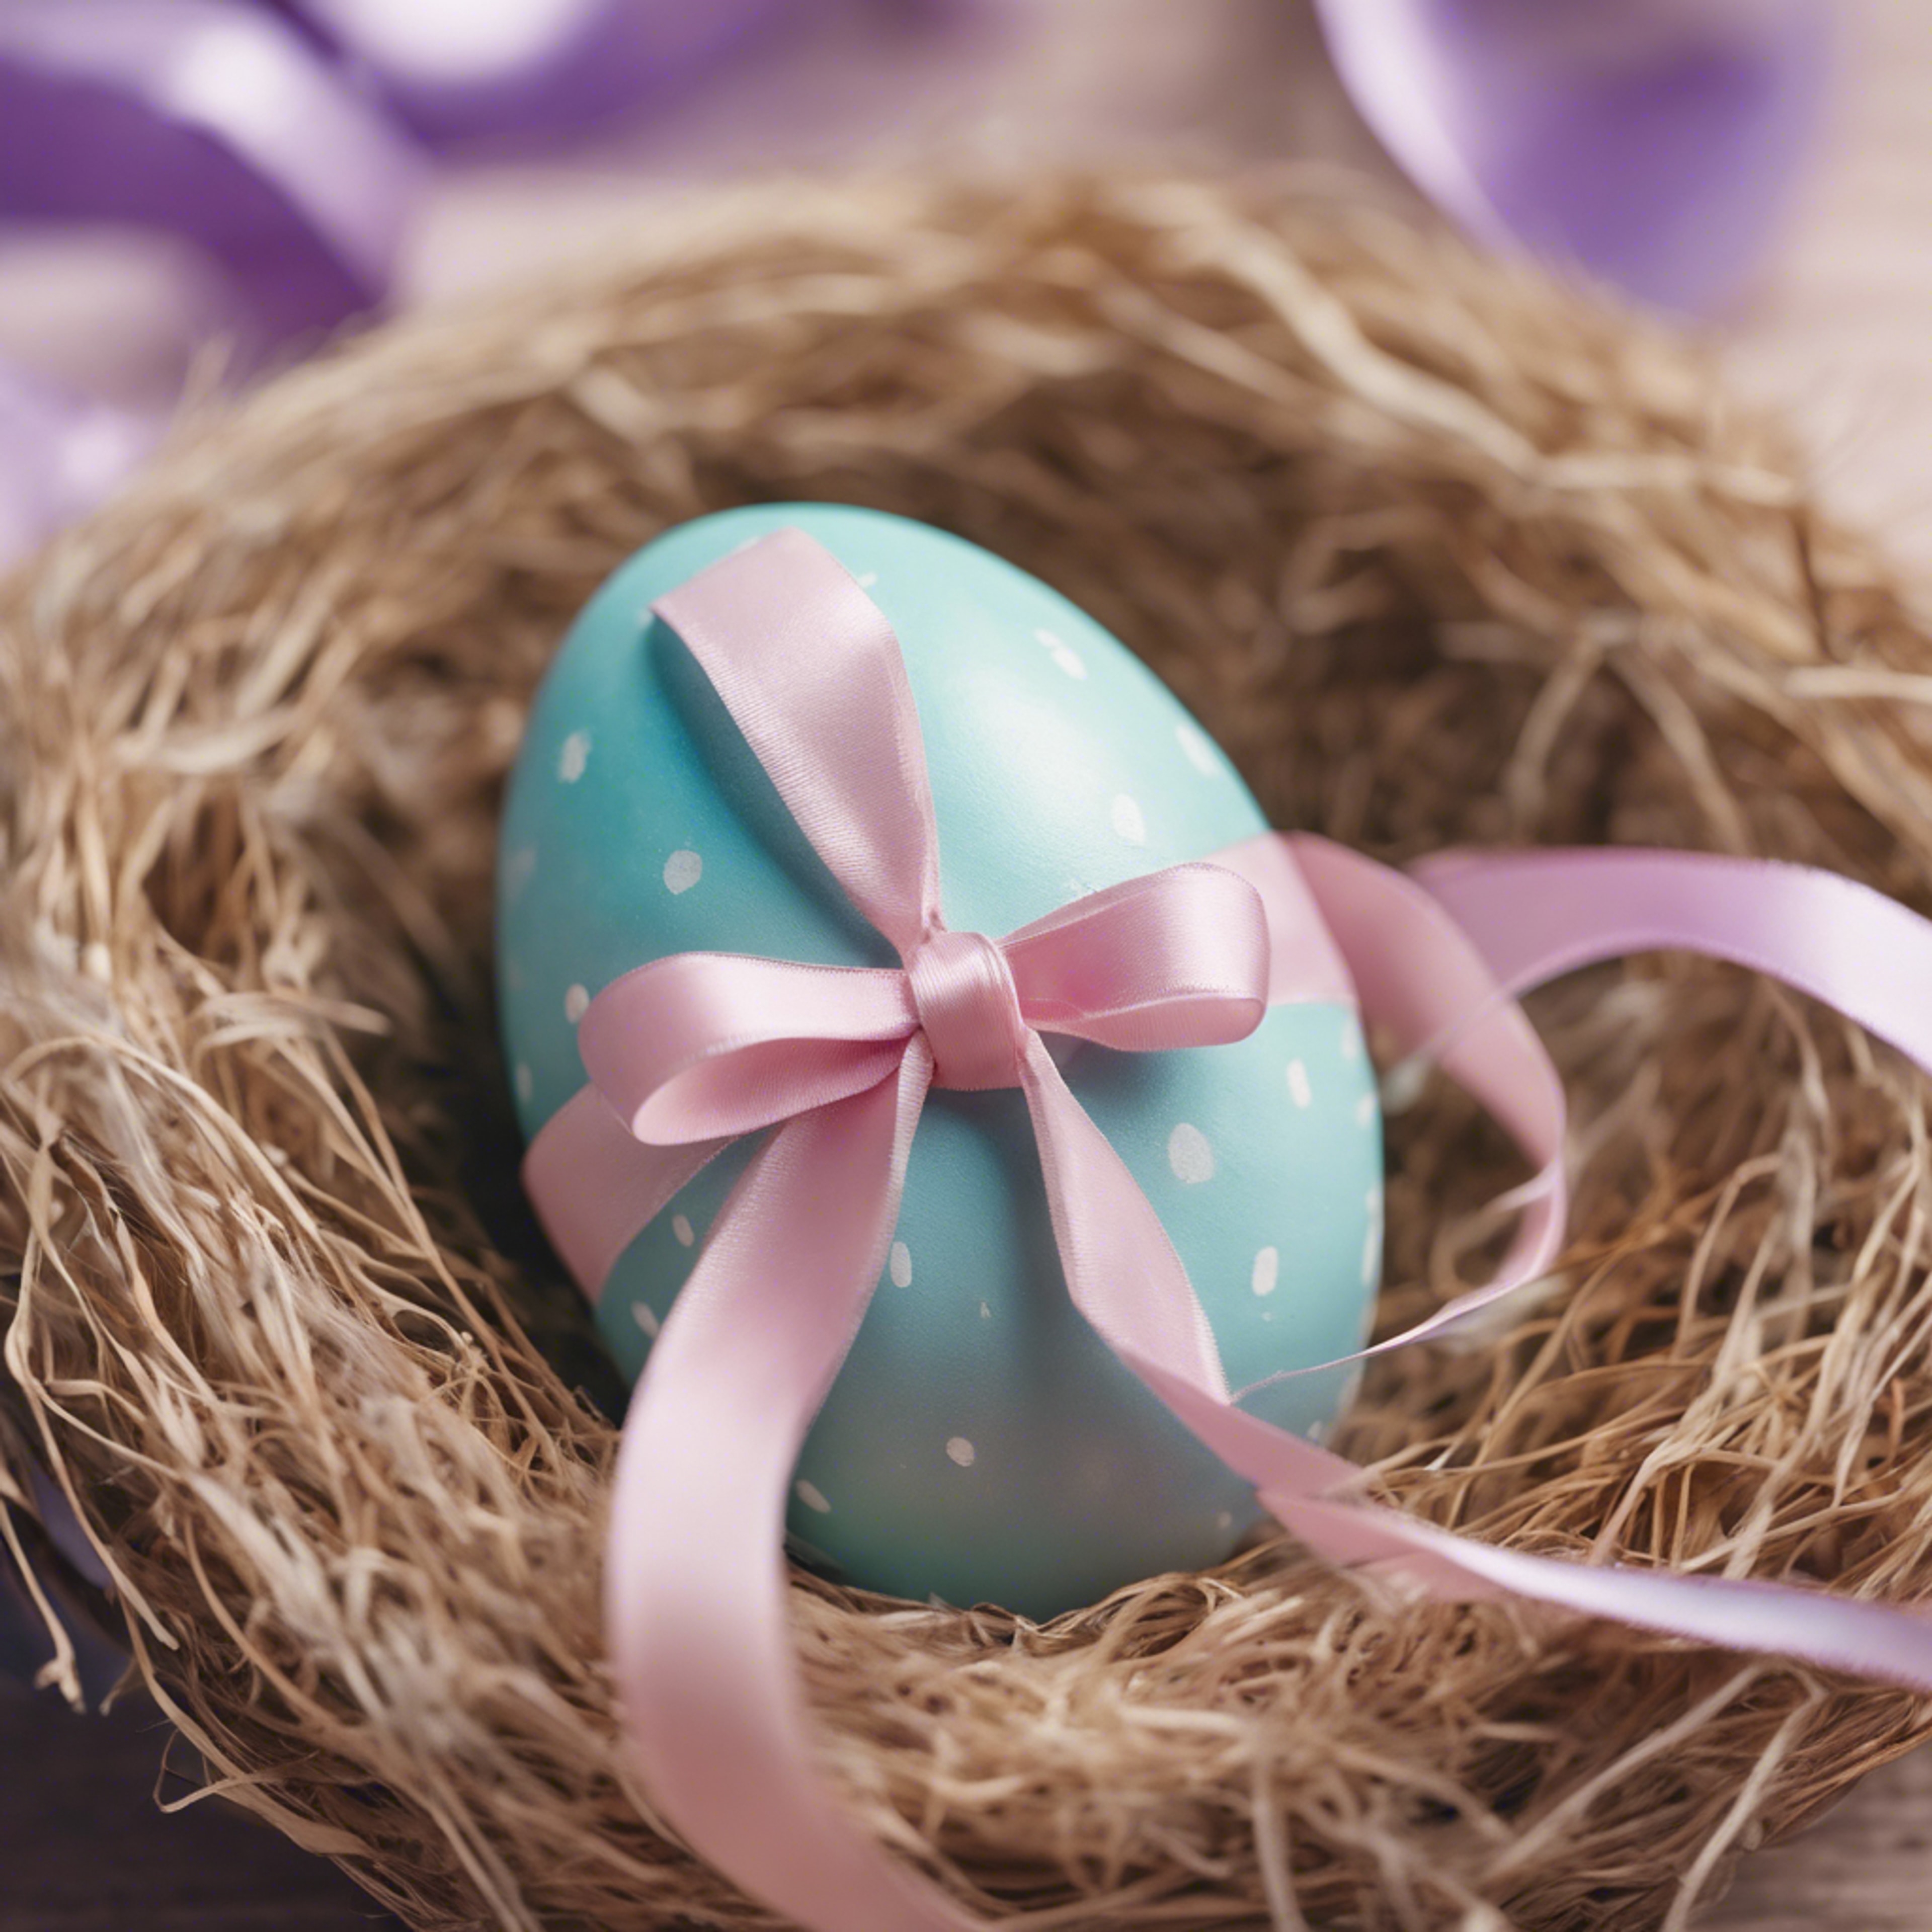 Close-up image of a pastel-colored Easter egg with ribbon details, on a nest. Tapeta[582f95aee8b94a49b4e5]